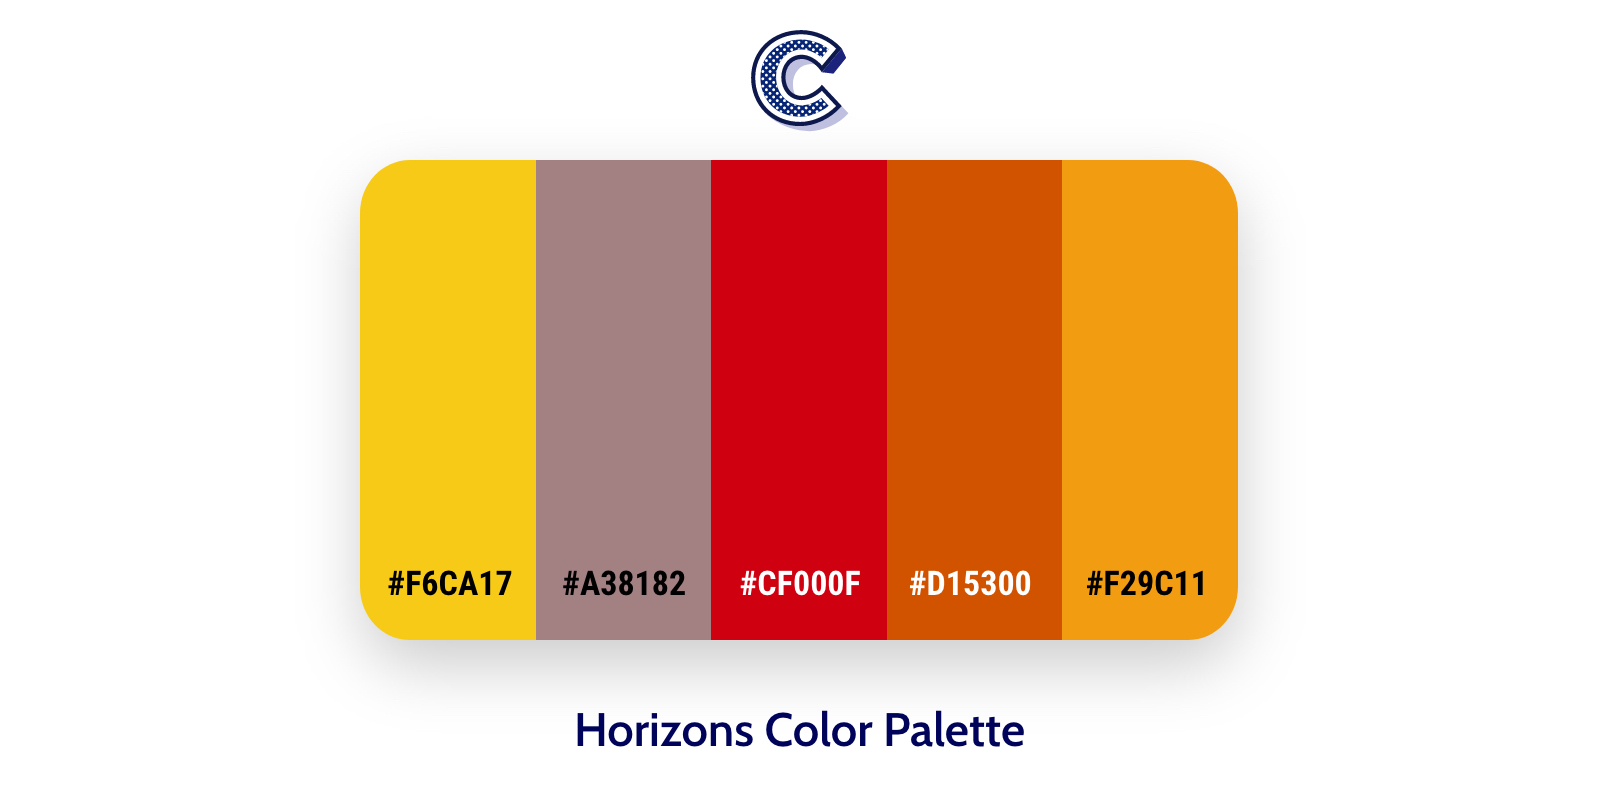 the featured image of horizons color palette